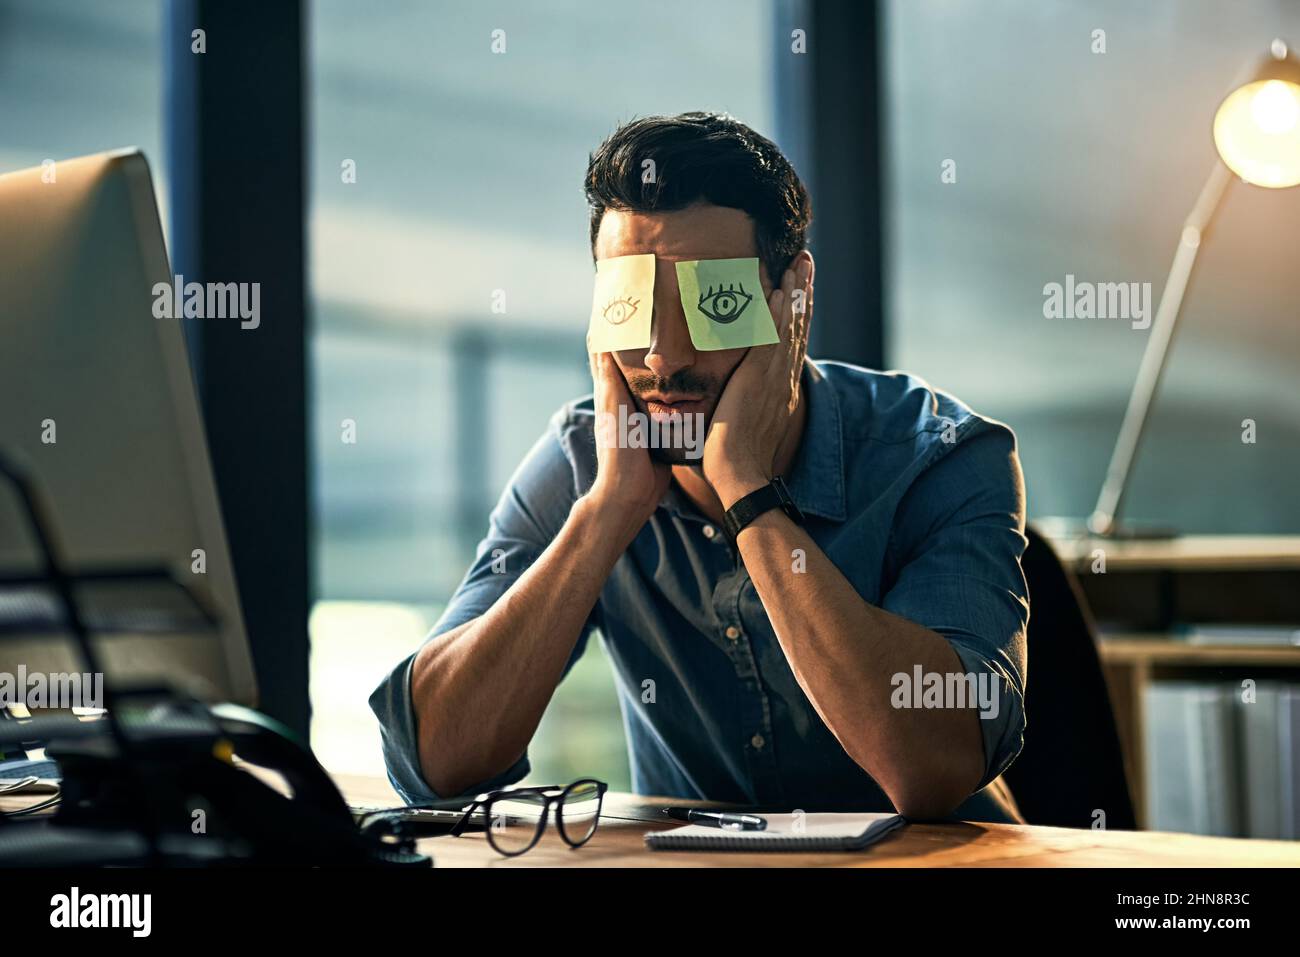 No time to sleep. Shot of a tired young businessman working late in an office with adhesive notes covering his eyes. Stock Photo